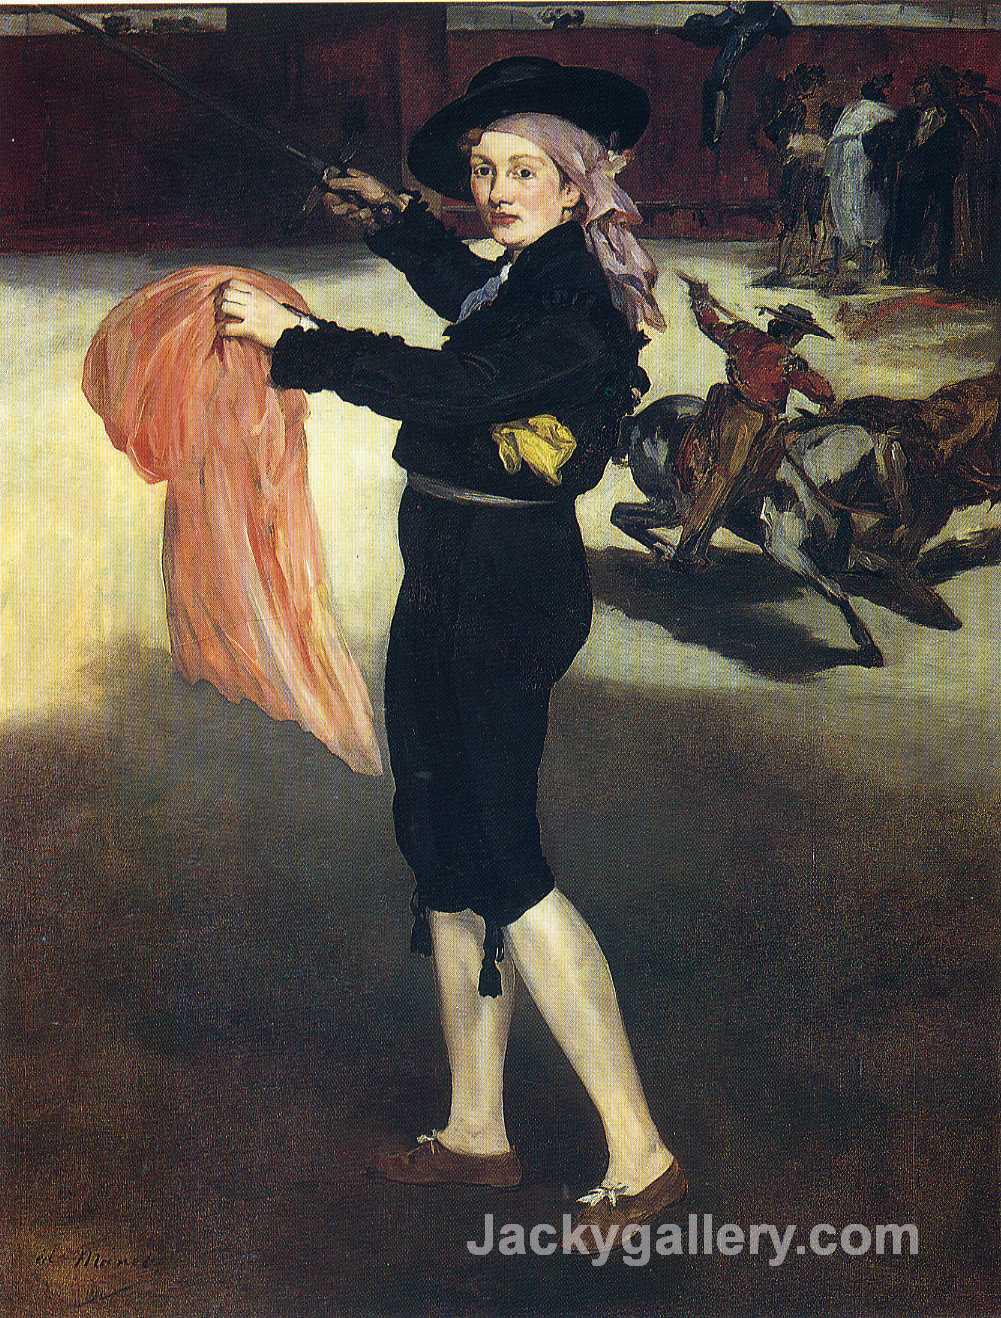 Victorine Meurent in the costume of an Espada by Edouard Manet paintings reproduction